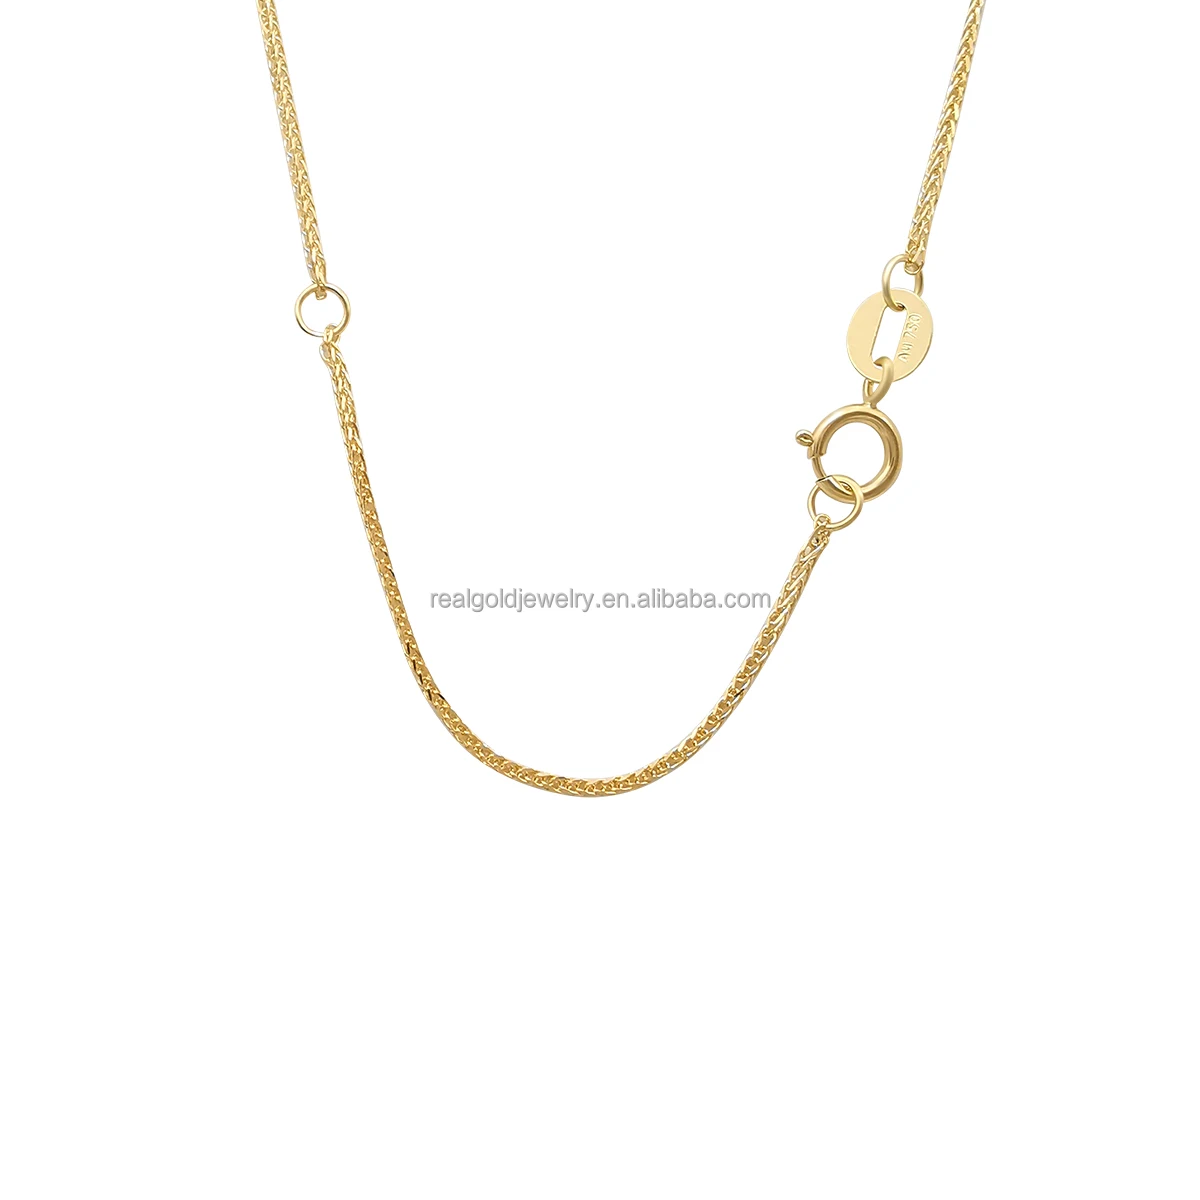 

Fine Jewelry AU750 18k Chain Necklace Solid Gold Chopin Chain Good Quality Custom Design Chinese Gold Chain